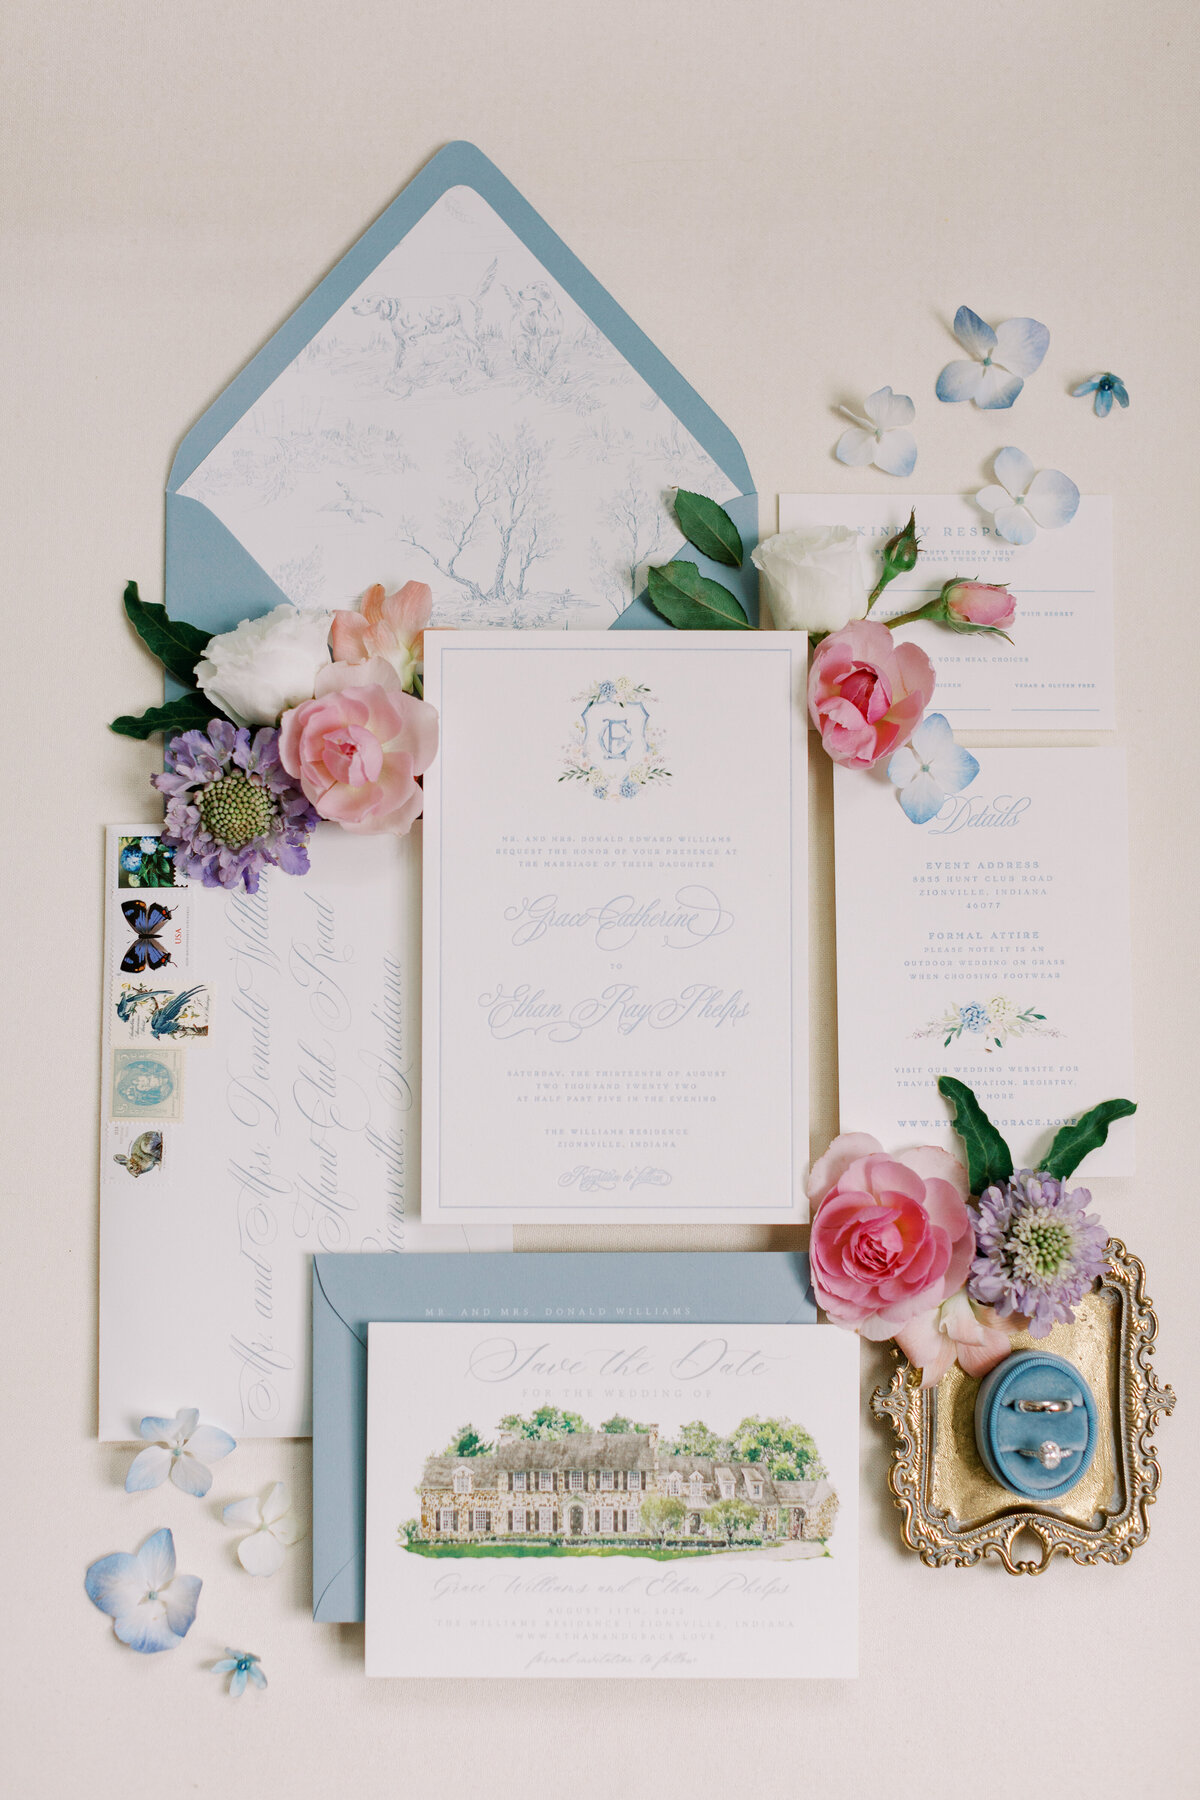 Custom wedding stationery with a crest and a watercolor depiction of the ceremony estate